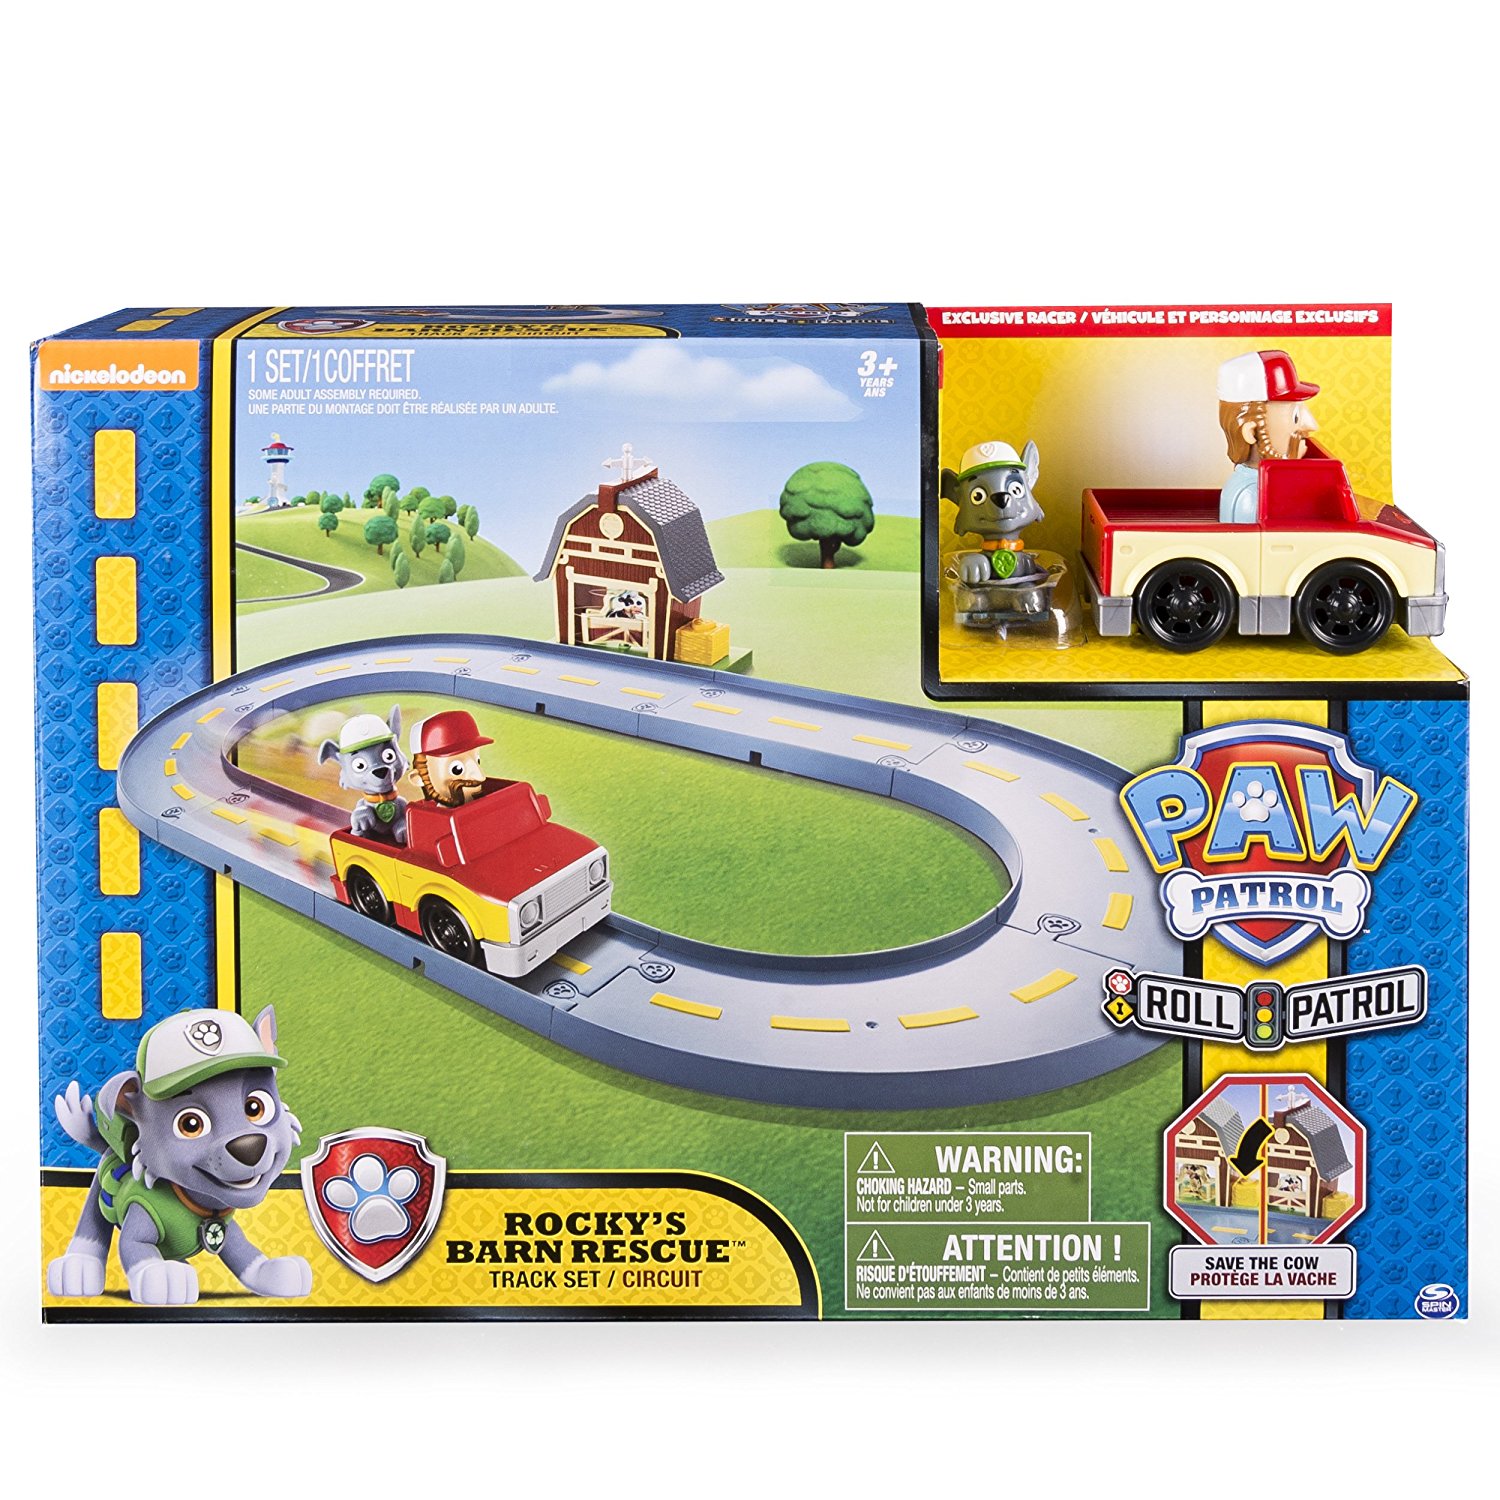 Paw Patrol Rocky’s Barn Rescue Track Set Only $7.97!